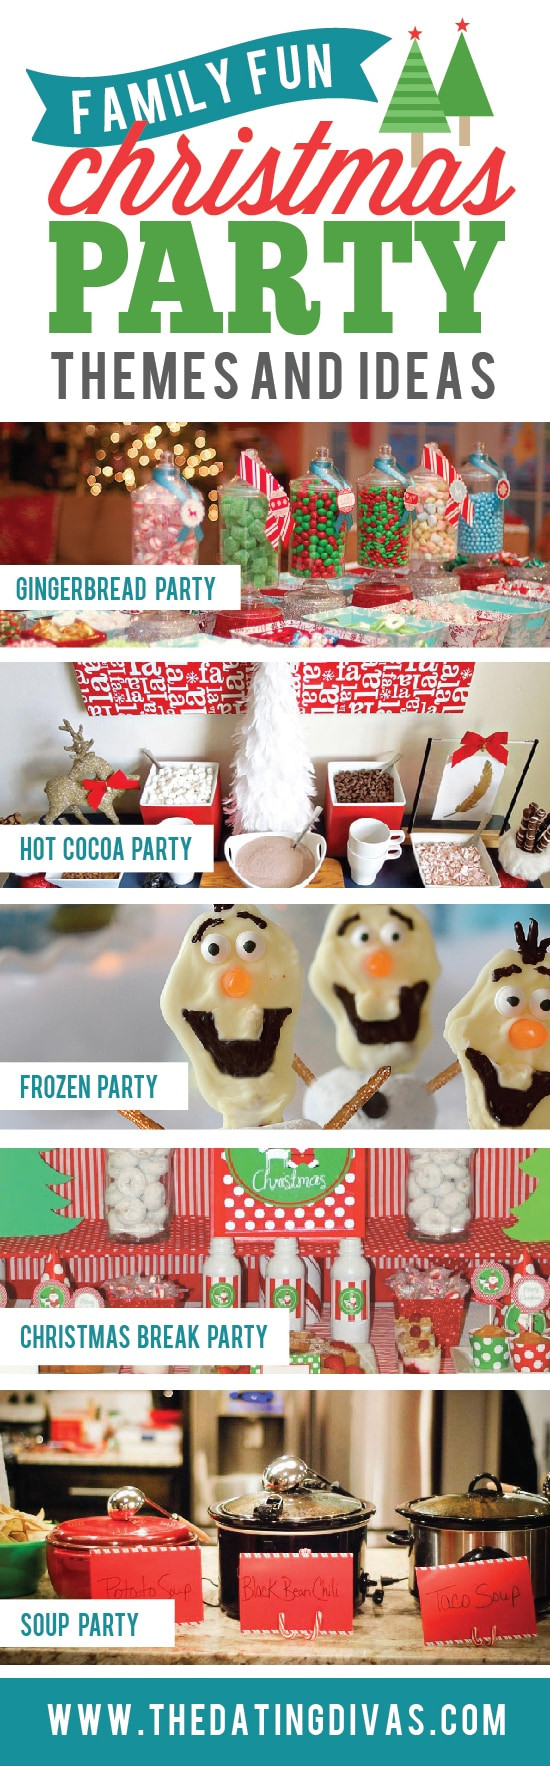 Fun Family Christmas Party Ideas
 15 Christmas Party Themes From the Dating Divas